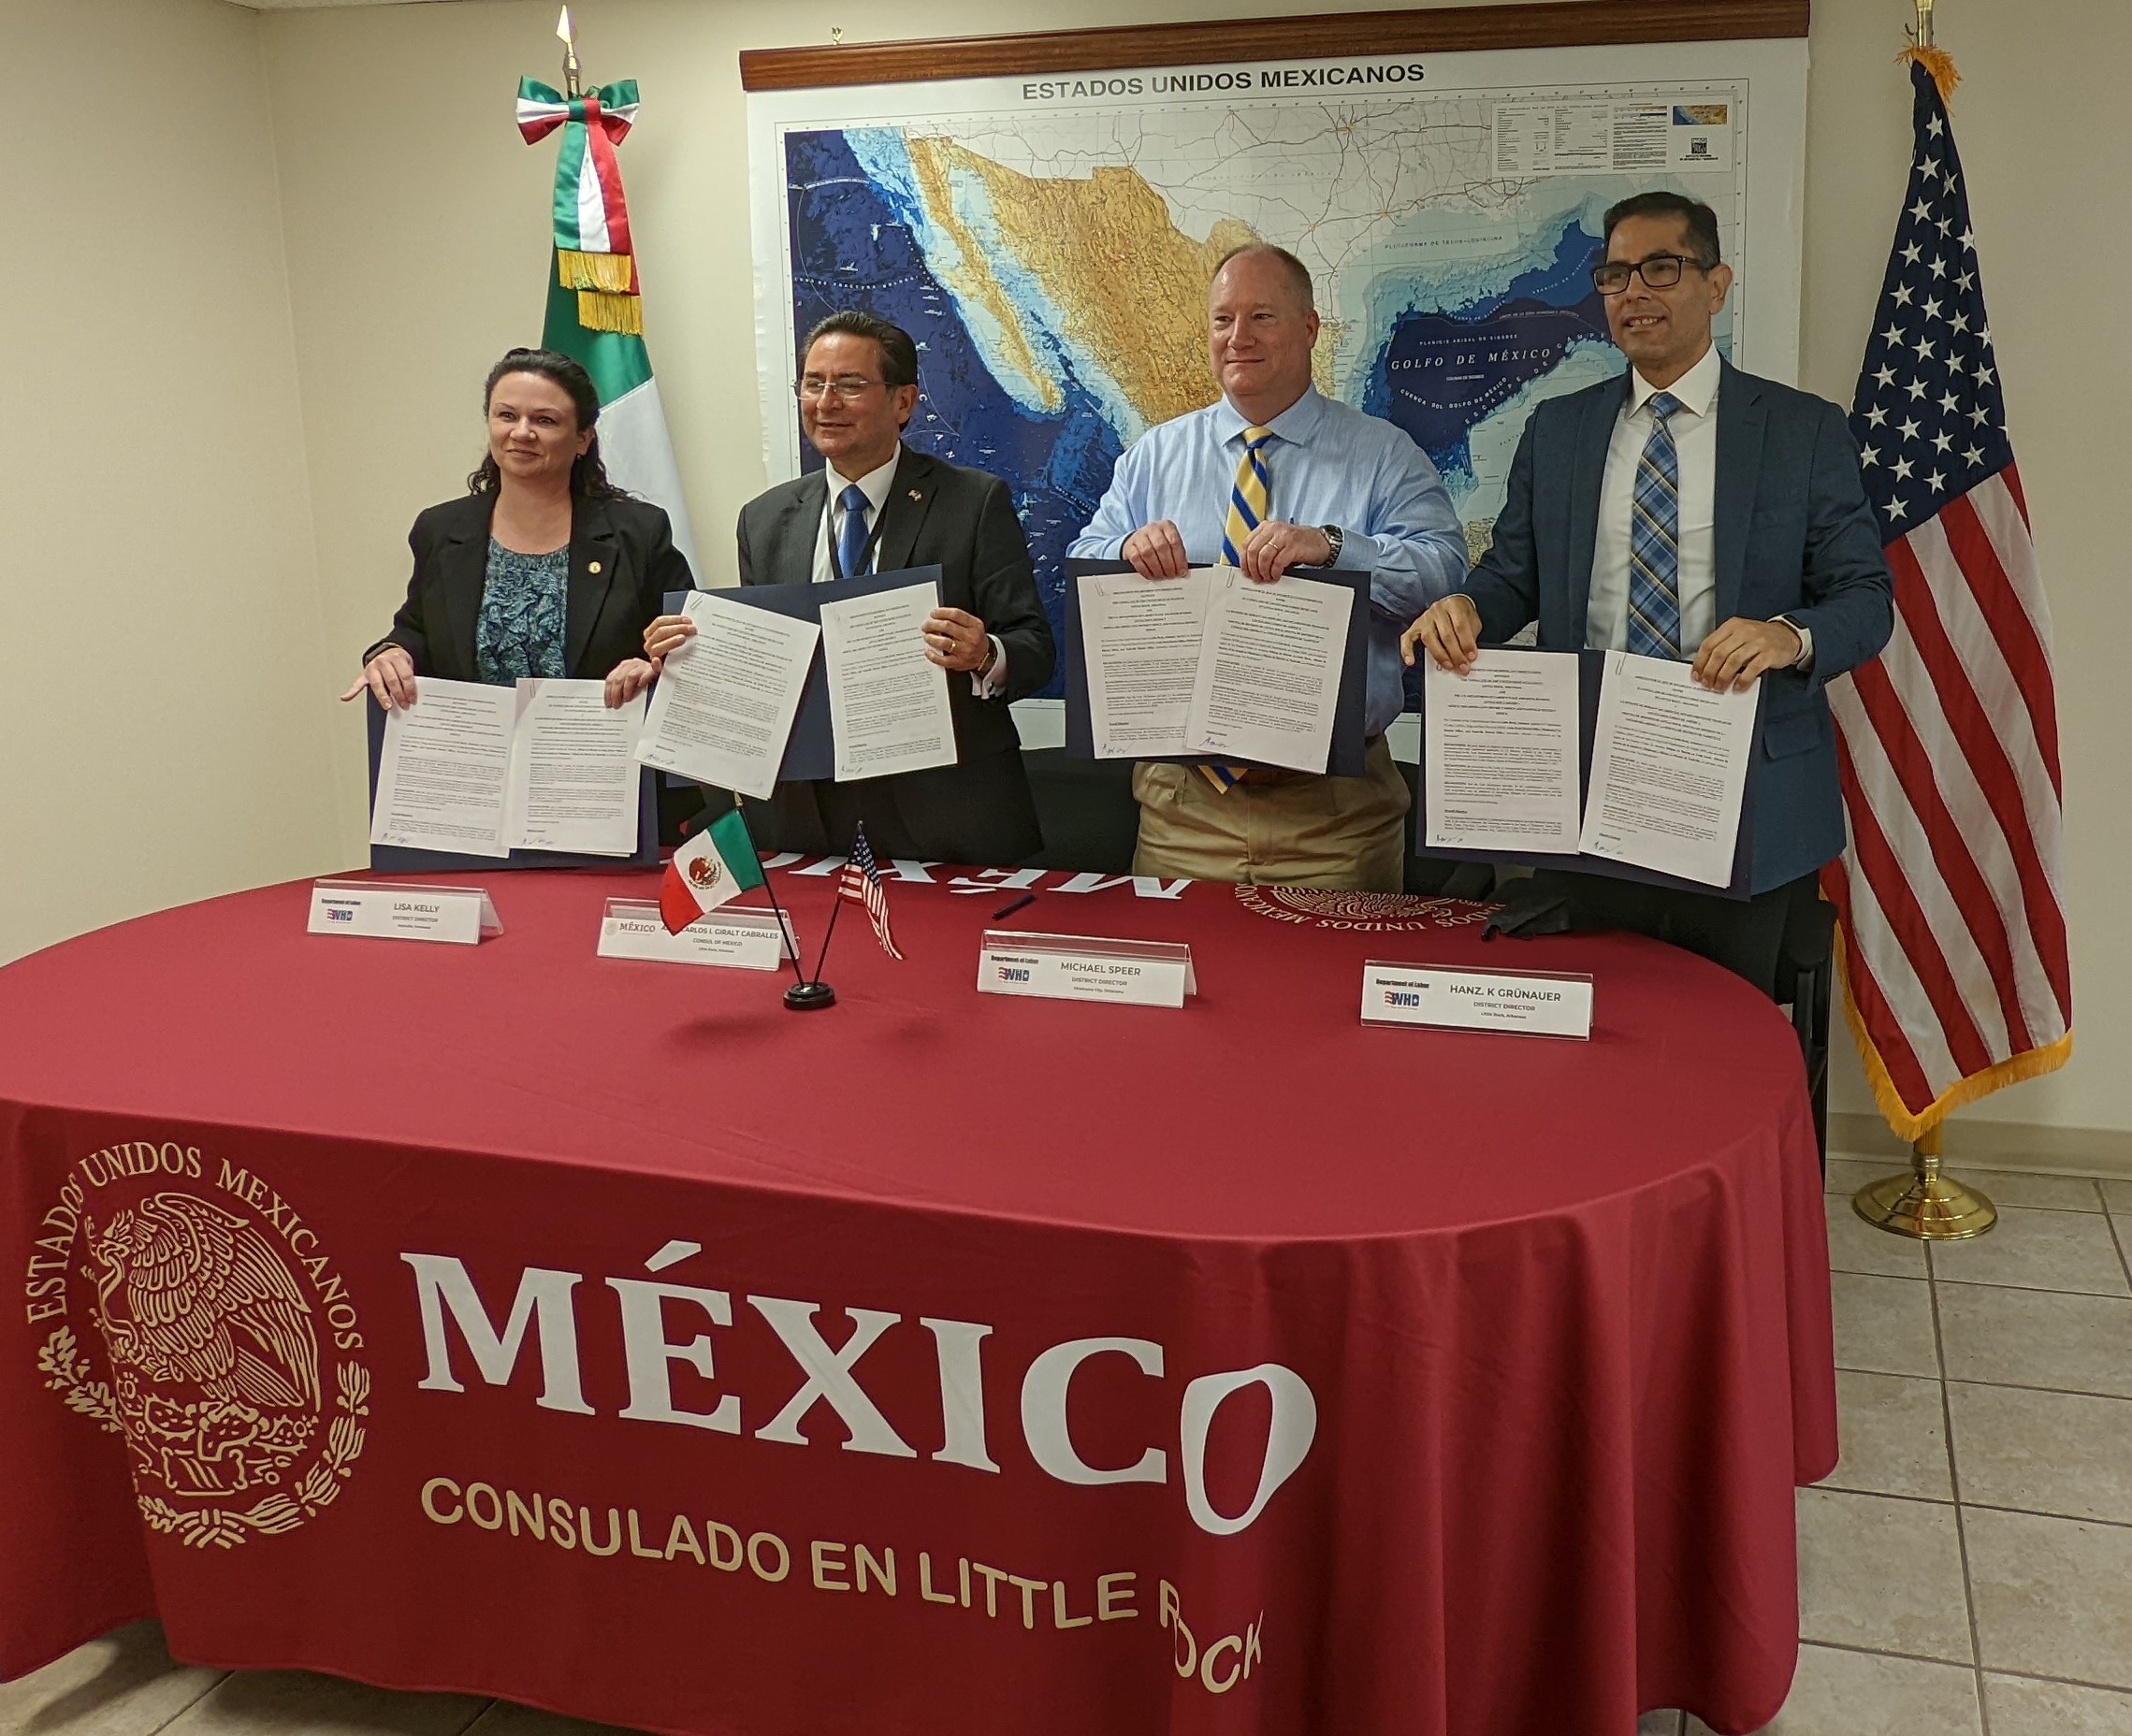 Lisa Kelly, of the Wage and Hour Division’s Nashville office and Carlos I. Giralt Cabrales of Mexican Consulate in Little Rock join the division’s Michael Speer and Hanz Grünauer to renew an alliance to protect native Mexican workers.